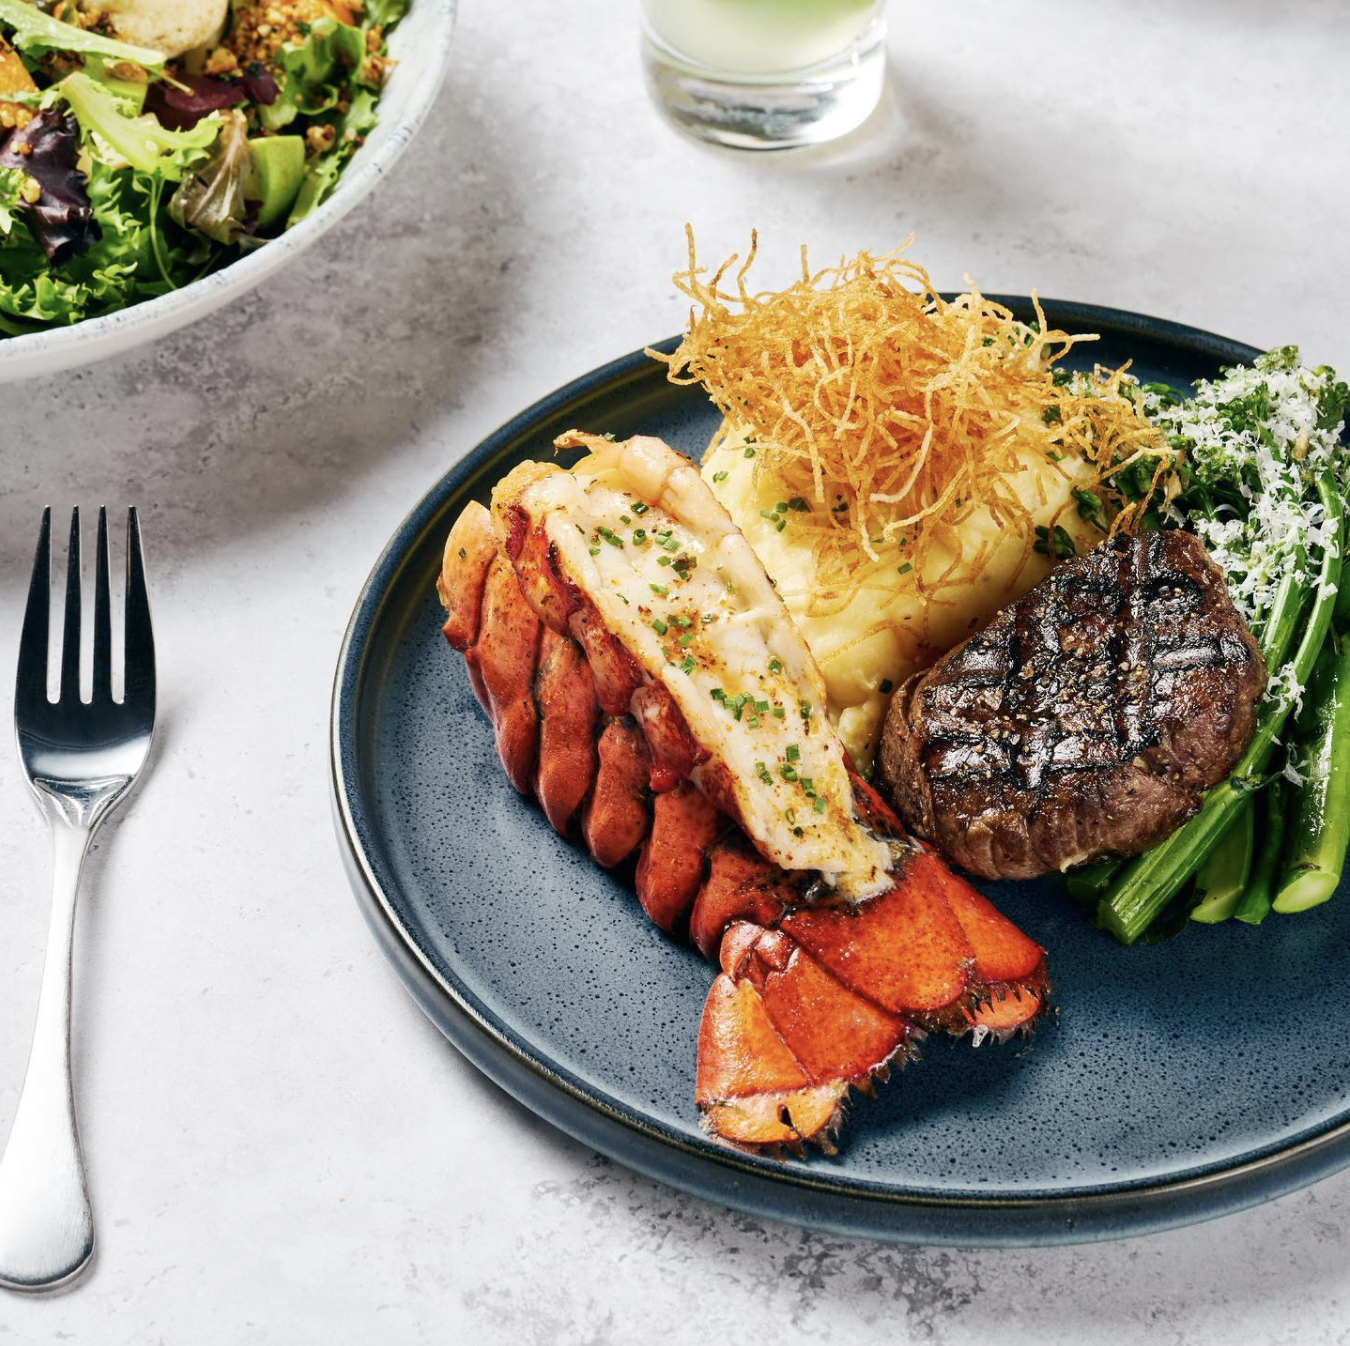 Image of a surf and turf meal at Earl's Kitchen and Bar. There is lobster tail, steak, mashed potatoes and greens on a blue plate and a bowl of salad in the left upper corner of the photo.